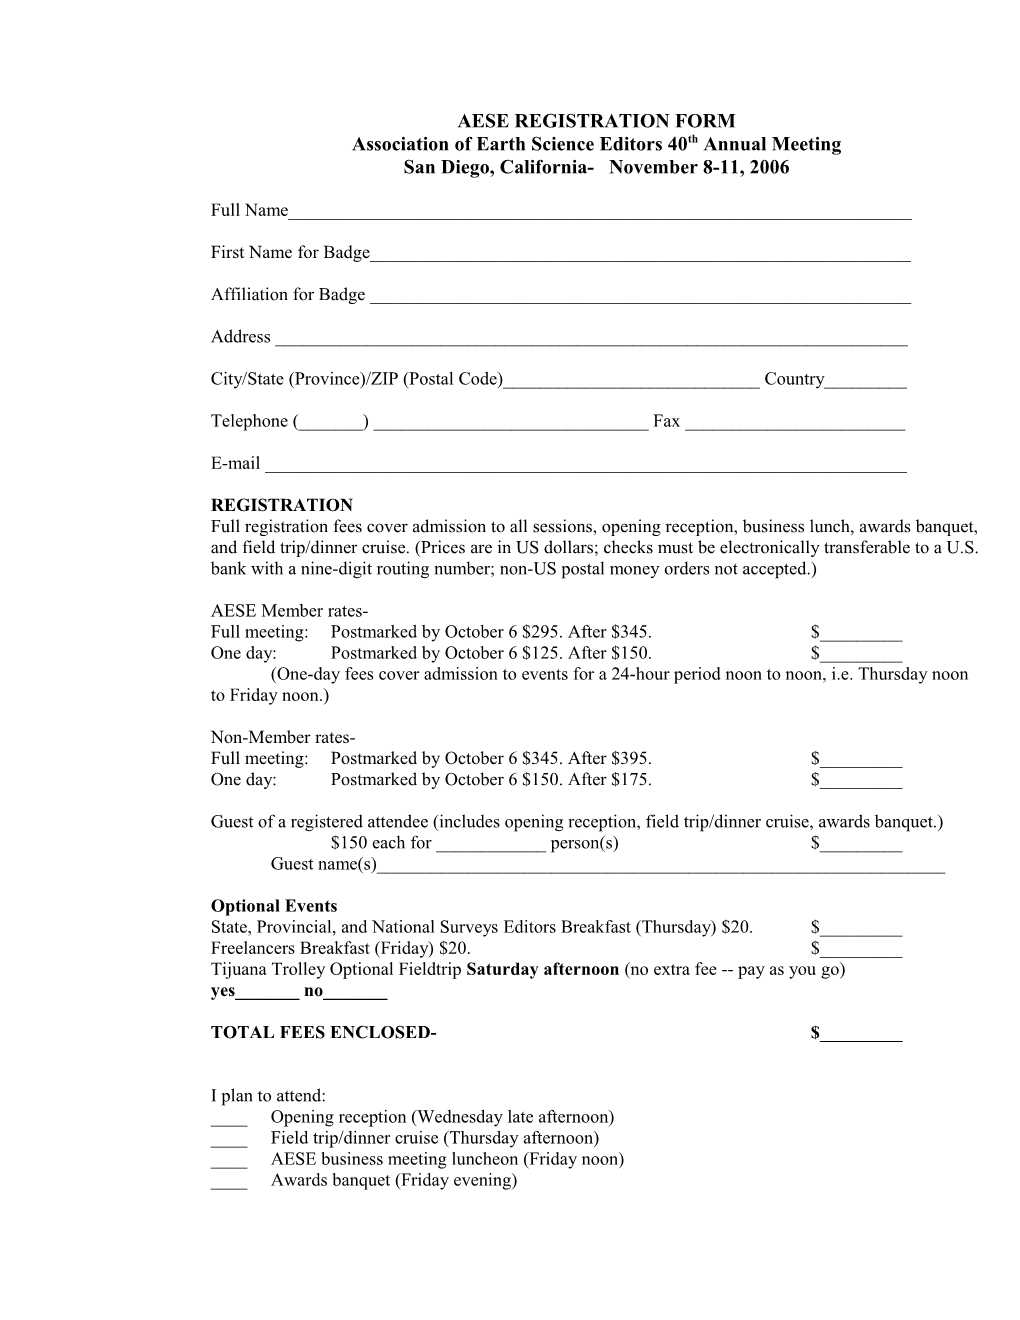 Aese Registration Form